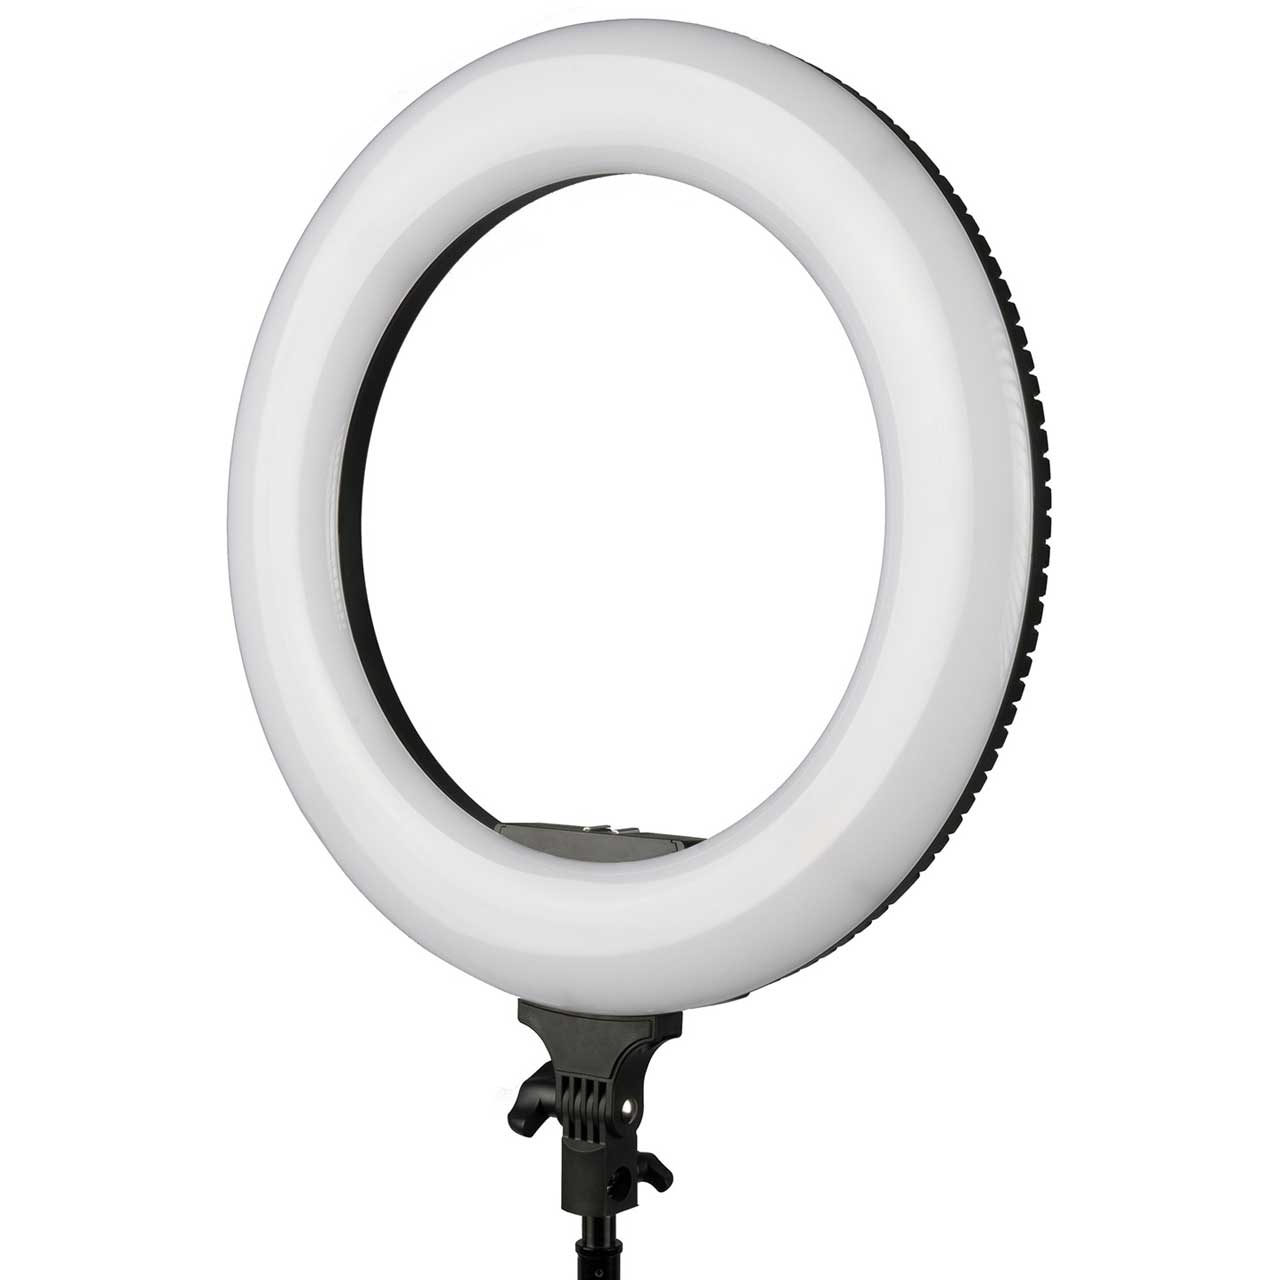 ikan RLB40-M Oryon 14 Inch Ring light with Phone Mount Remote and Bag IKAN-RLB40-M